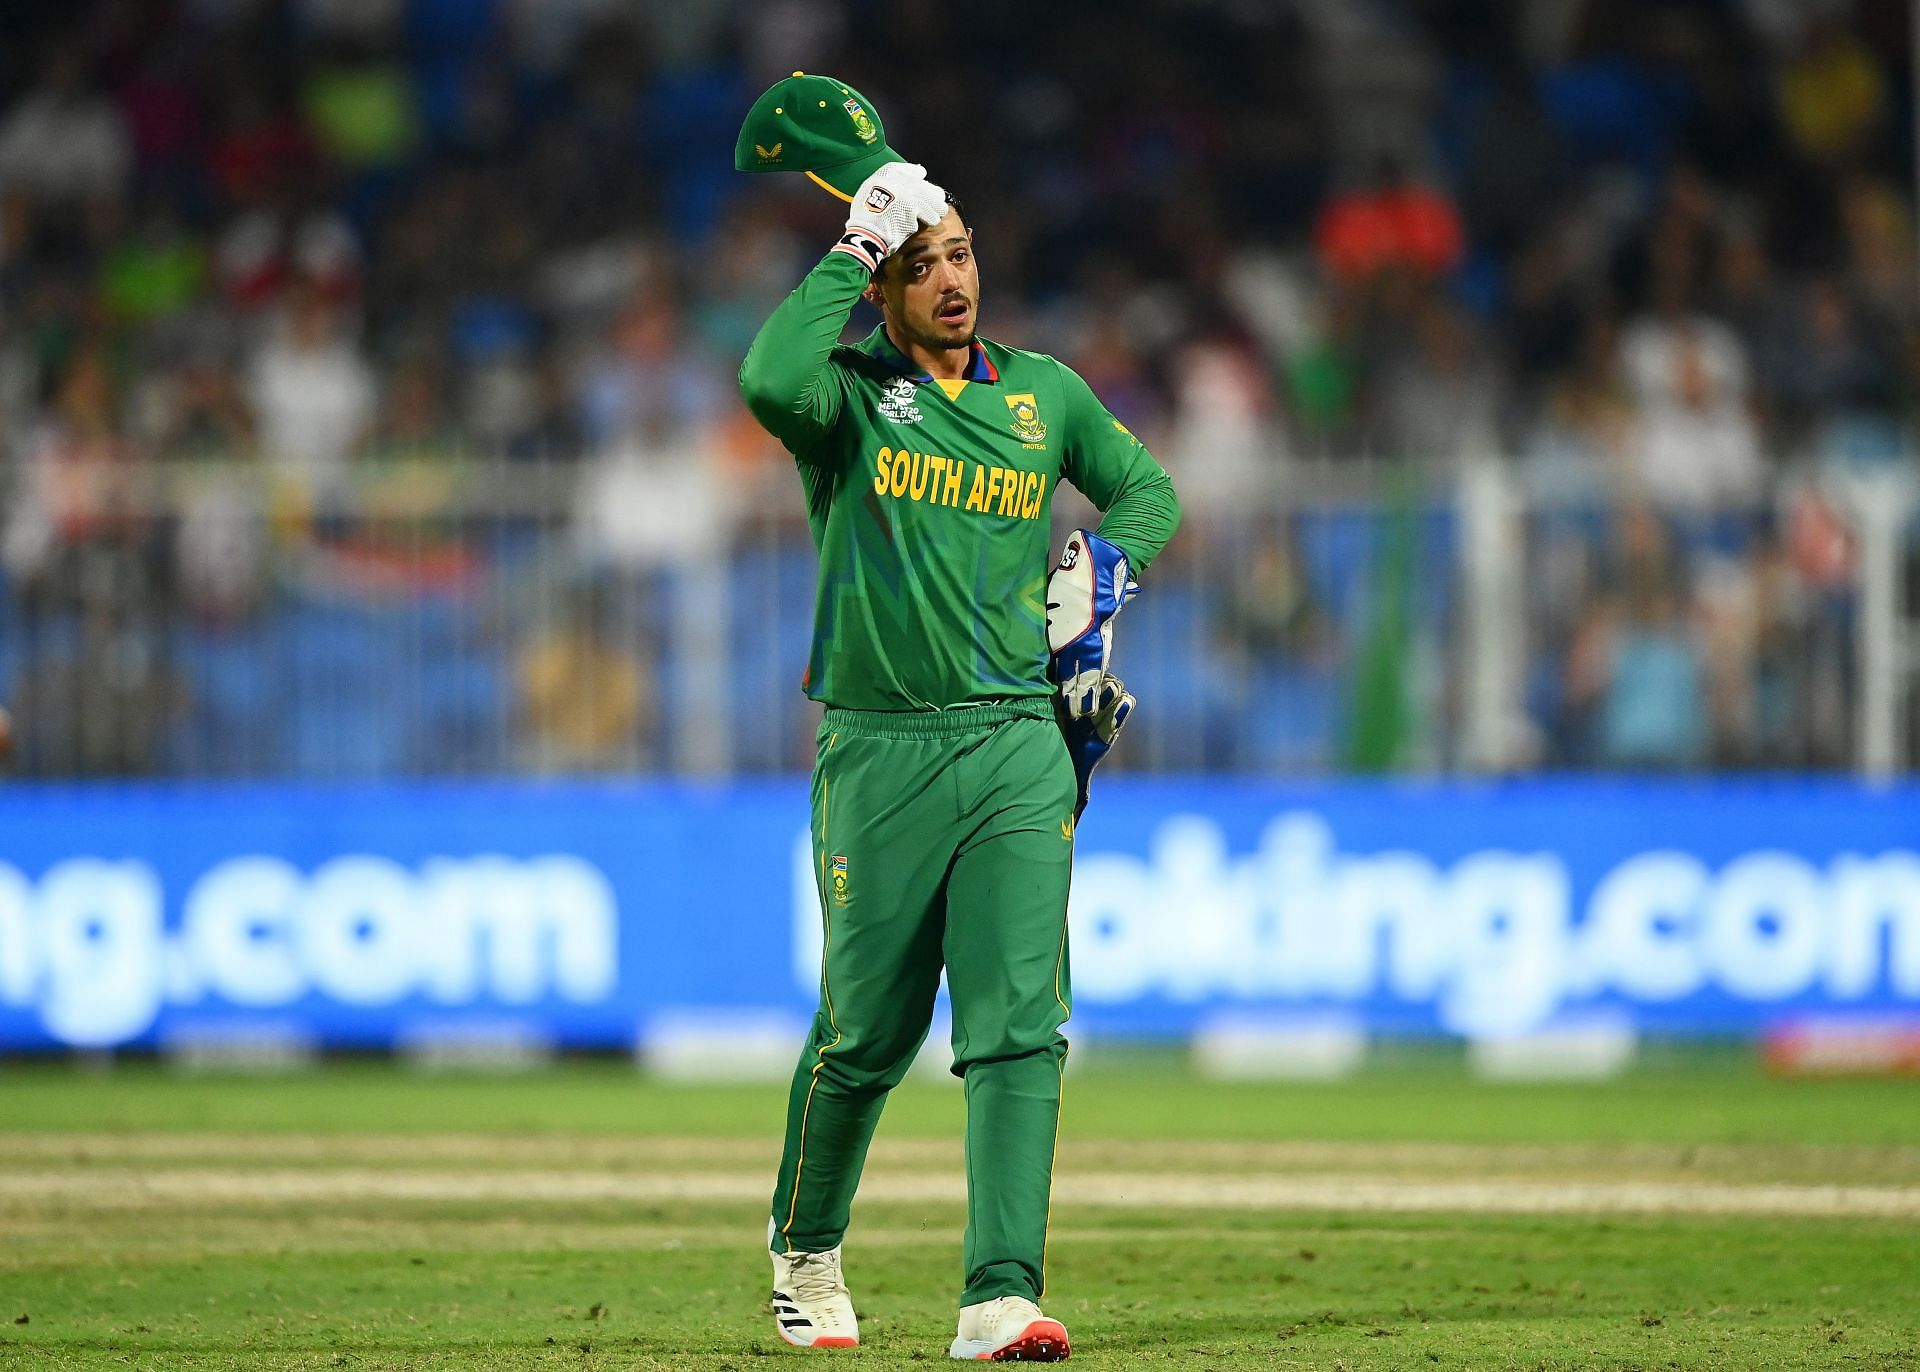 Quinton de Kock will be a great multiplier choice for your TIT vs ROC Dream11 Fantasy Team